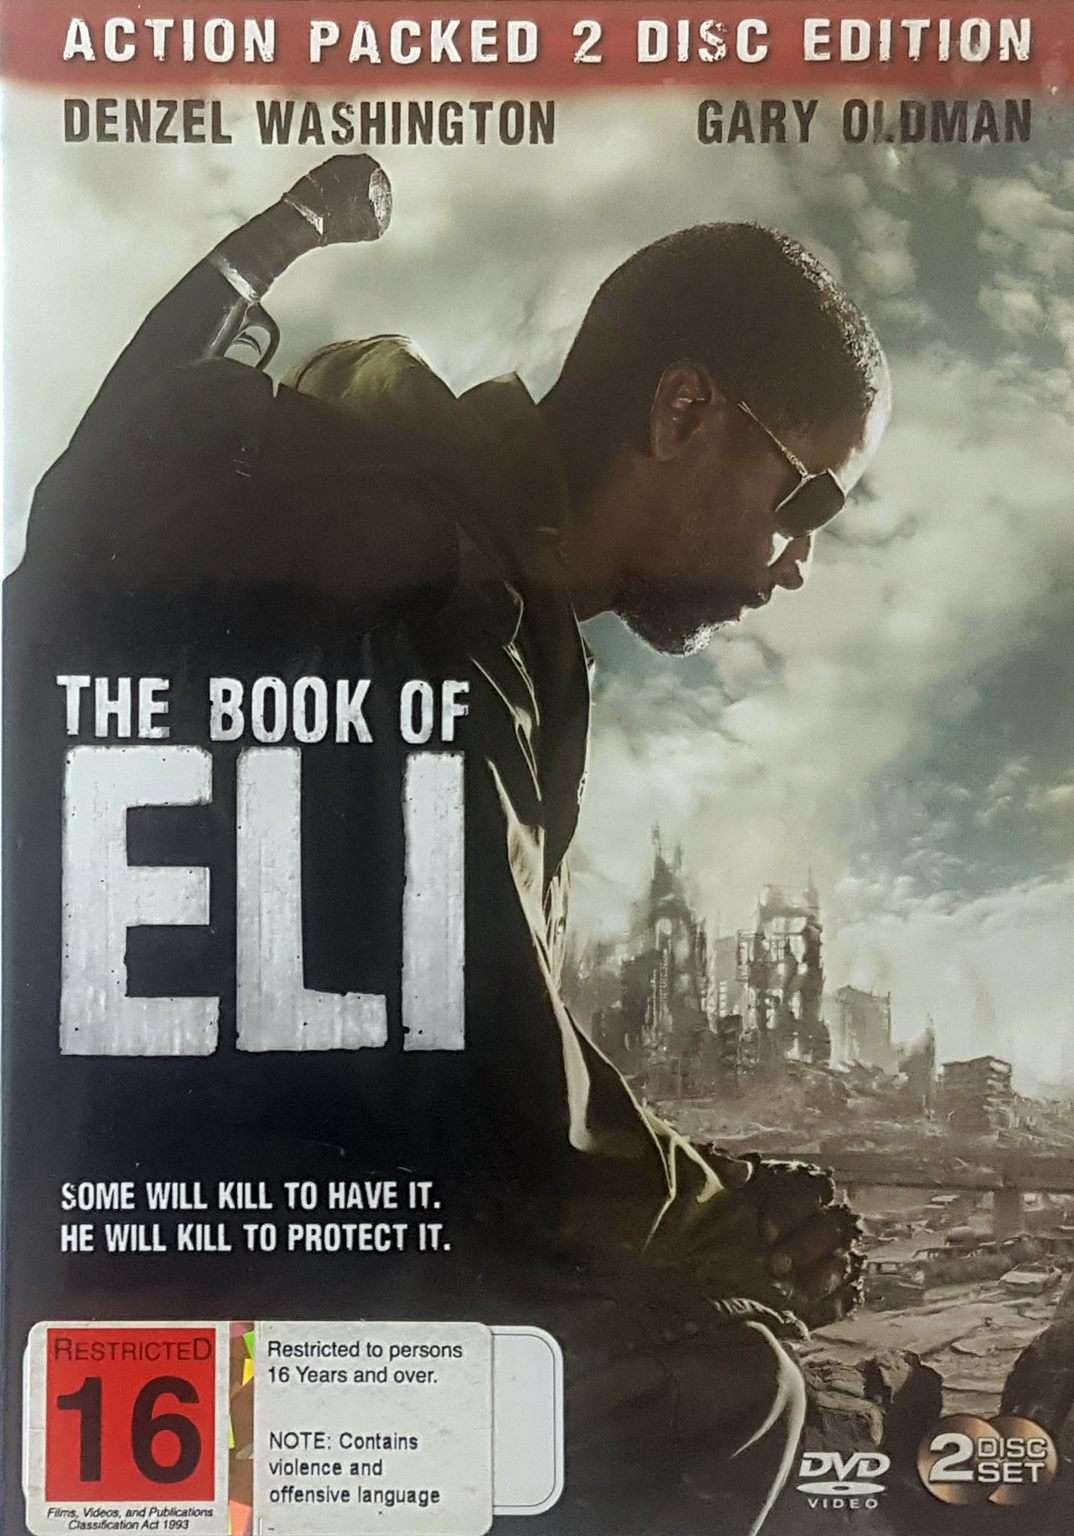 The Book of Eli 2 Disc Edition